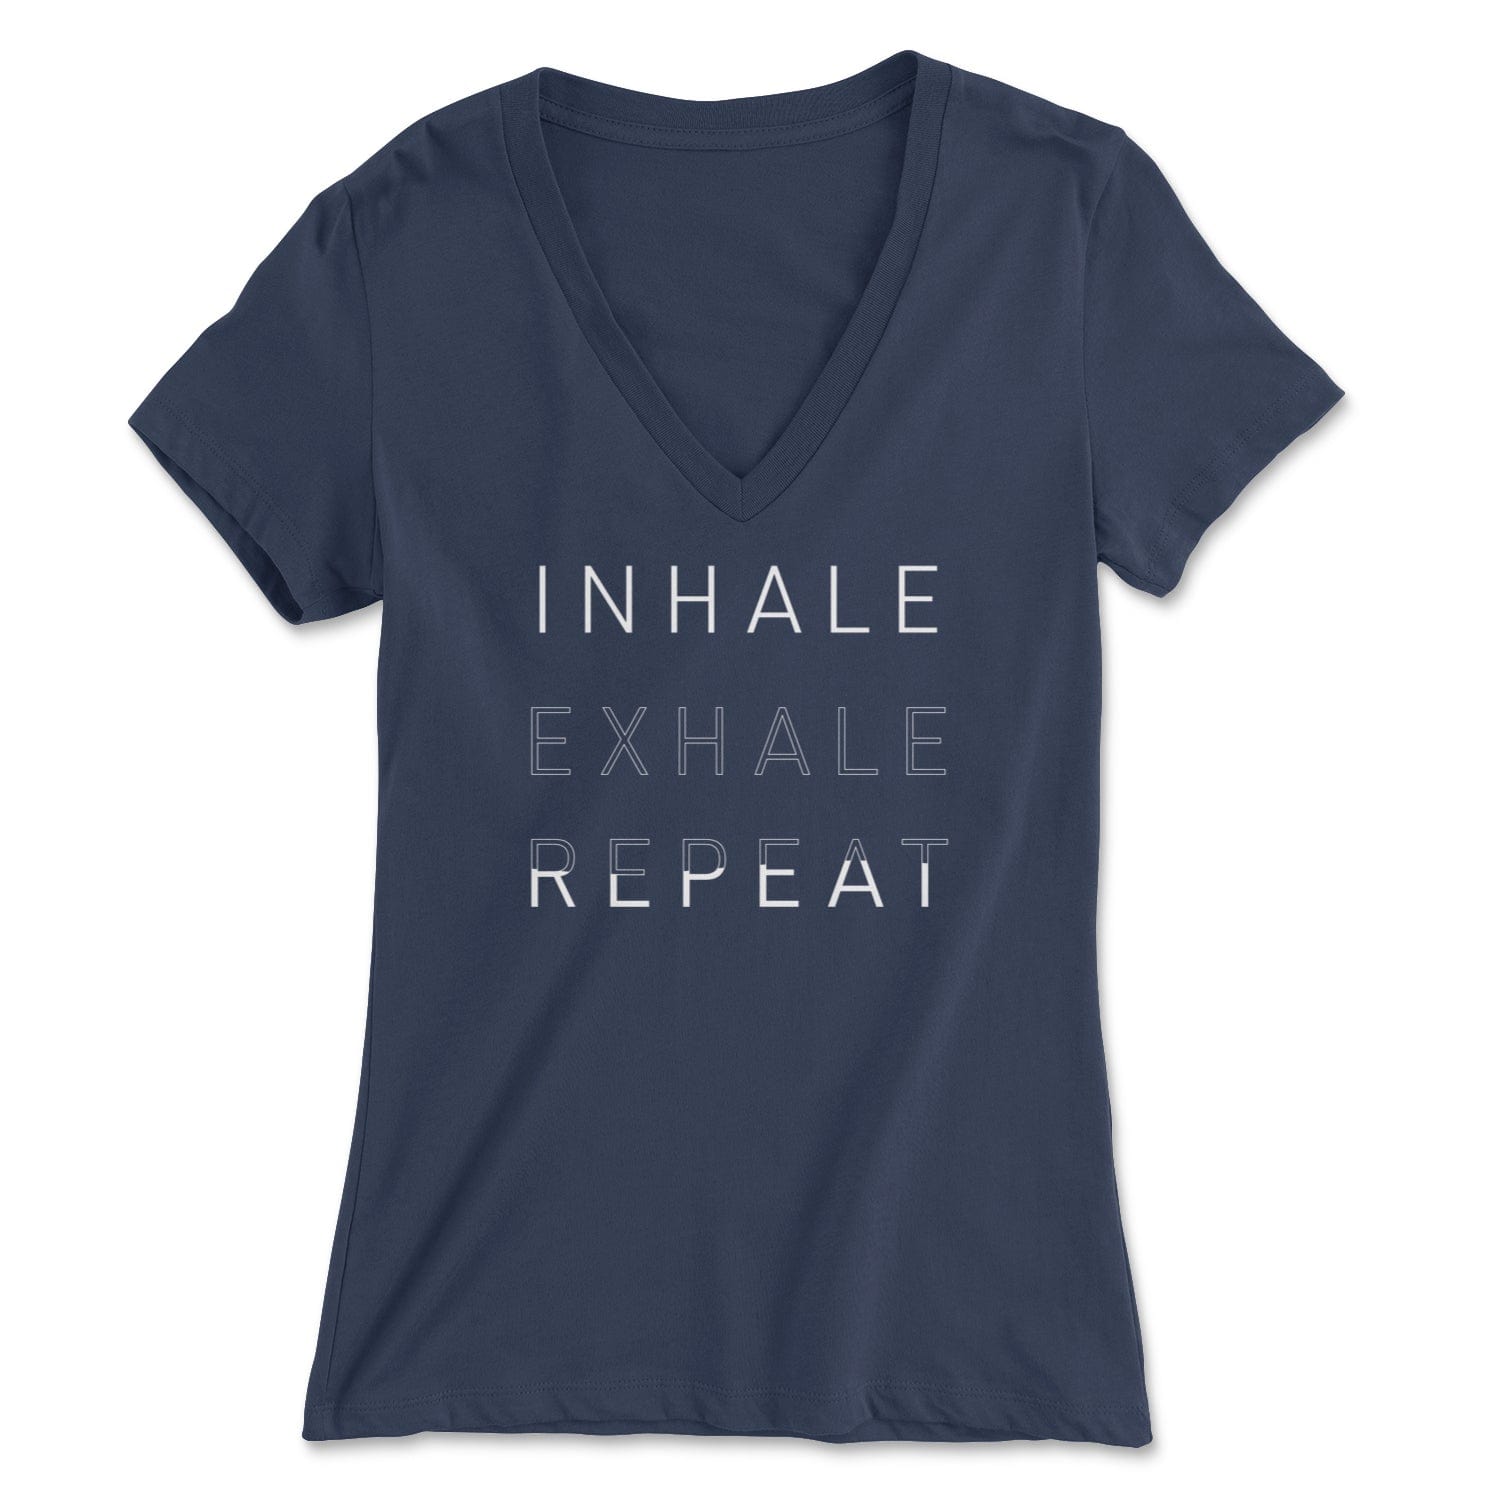 "Inhale Exhale Repeat" - Women's V-Neck Tee Skyba Print Material